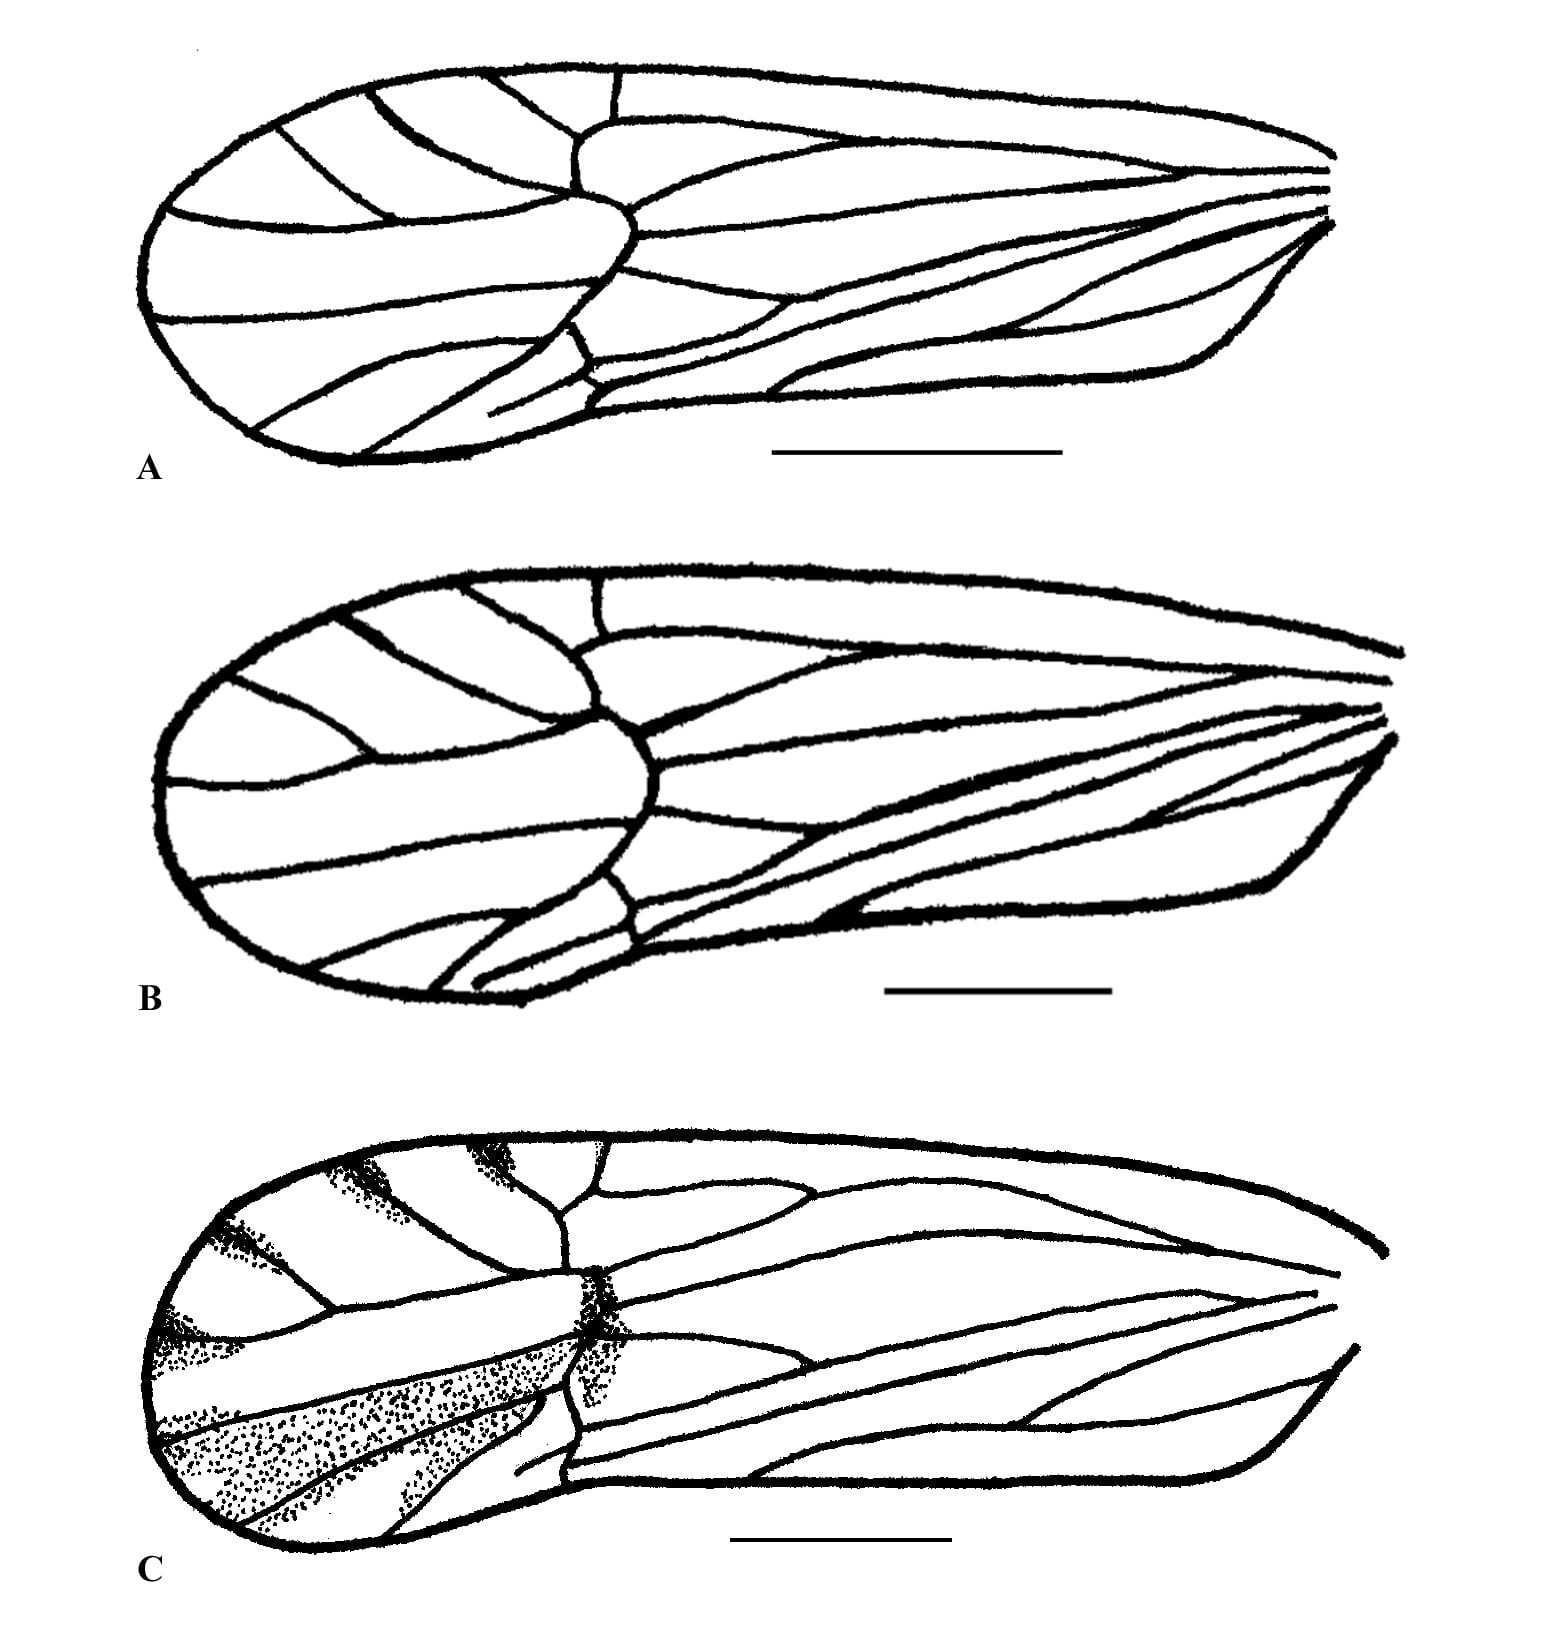 Fig. 1. Left forewing of Toya, Metadelphax, and Hadropygos (scale = 0.5 mm). A. Toya attenuata (holotype), B. Metadelphax propinqua, C. Hadropygos rhombos (holotype).